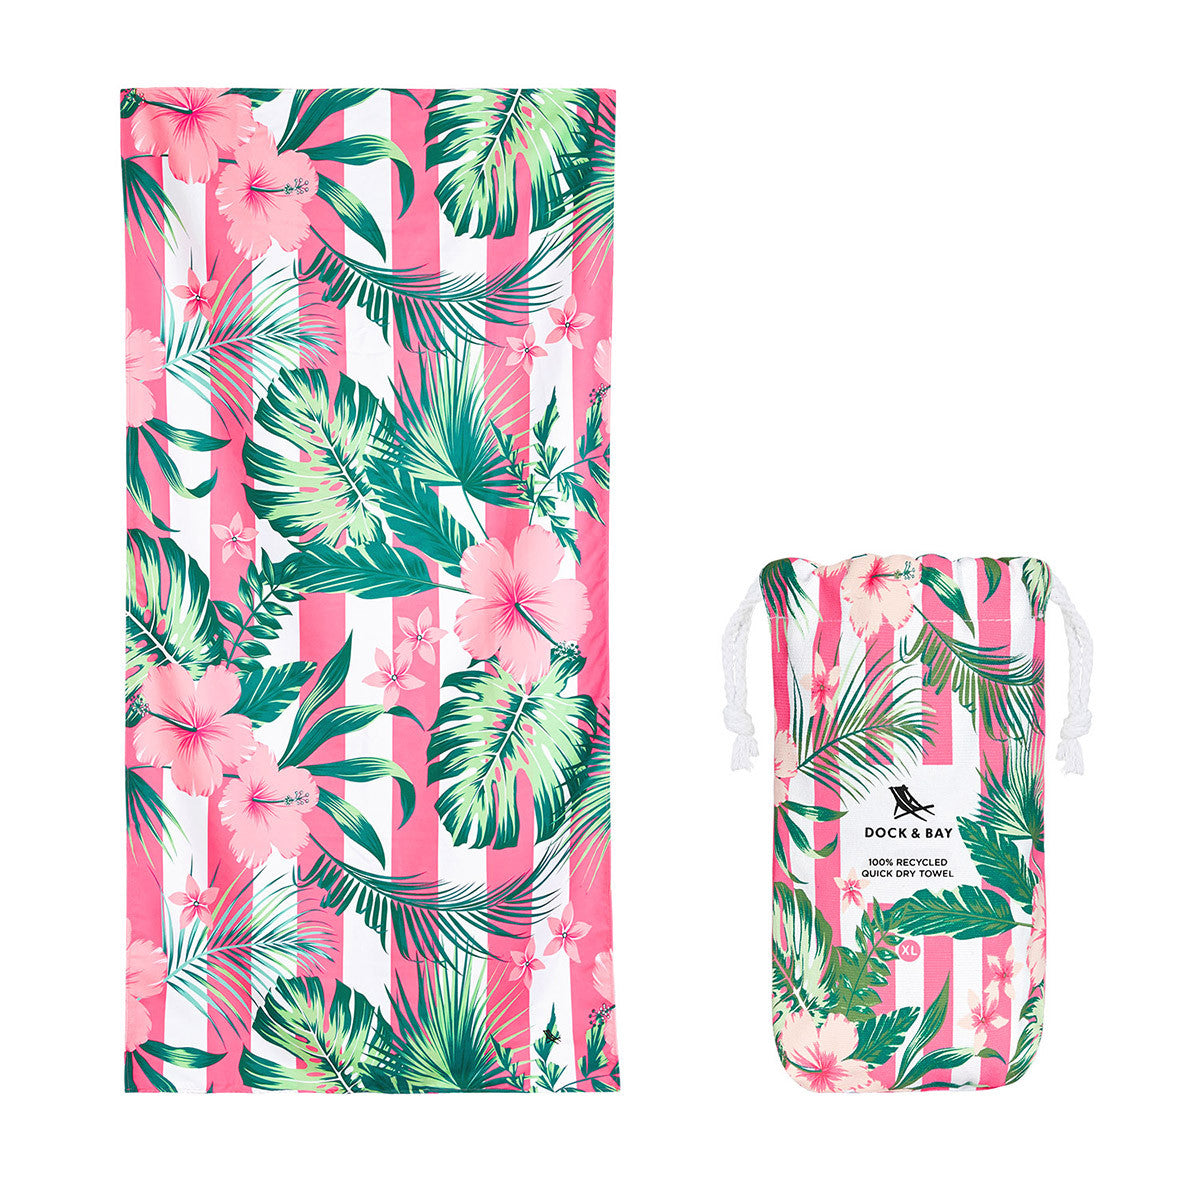 Dock and Bay Beach Towel Botanical Collection XL - Heavenly Hibiscus